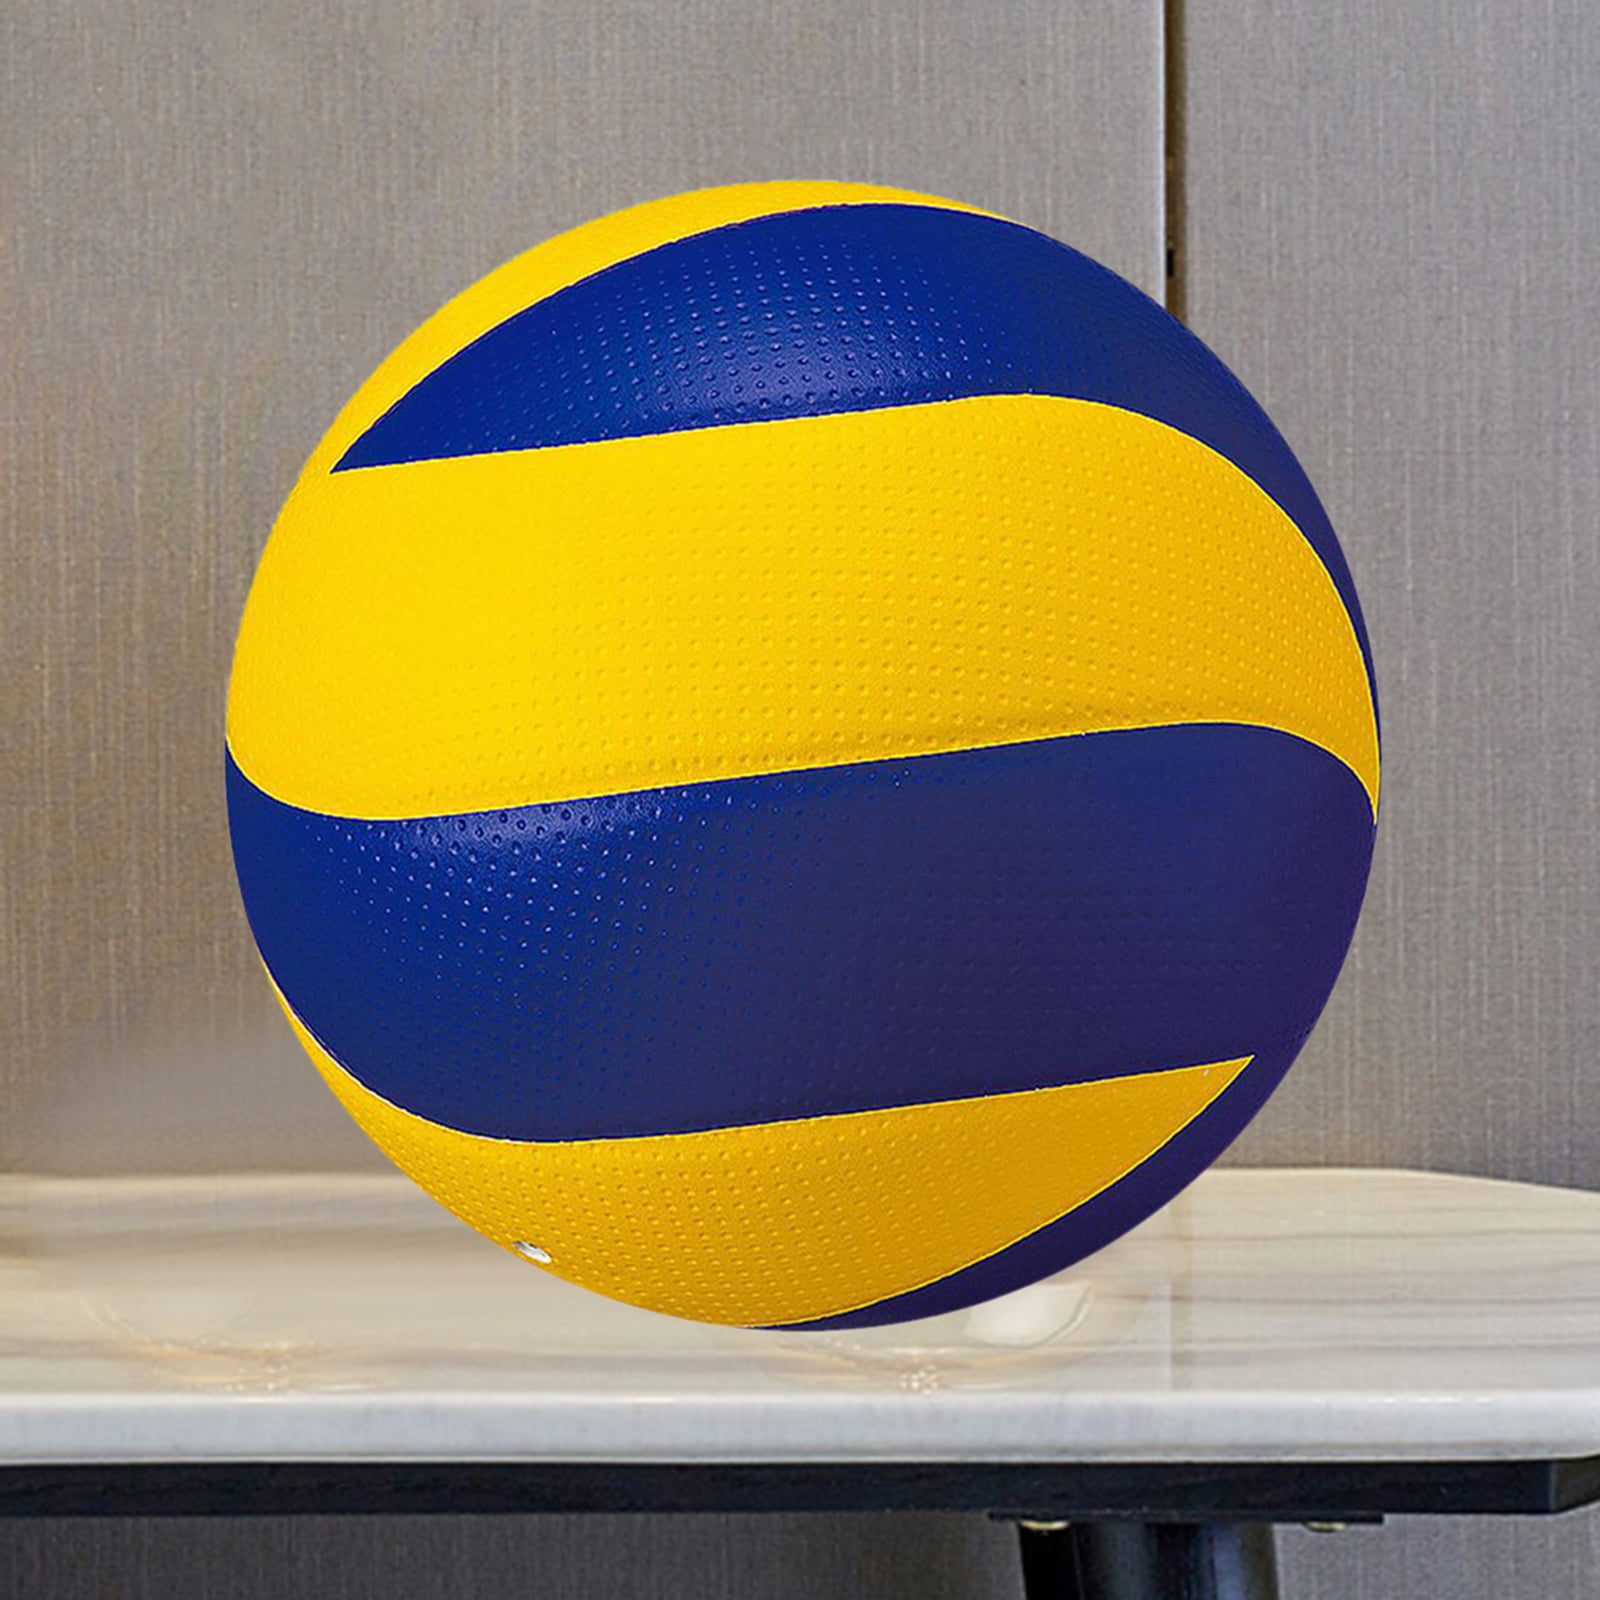 SOFT TOUCH BEACH VOLLEY BALL SIZE 5 OFFICIAL SIZE AND WEIGHT DEFLATED 260G 280G 